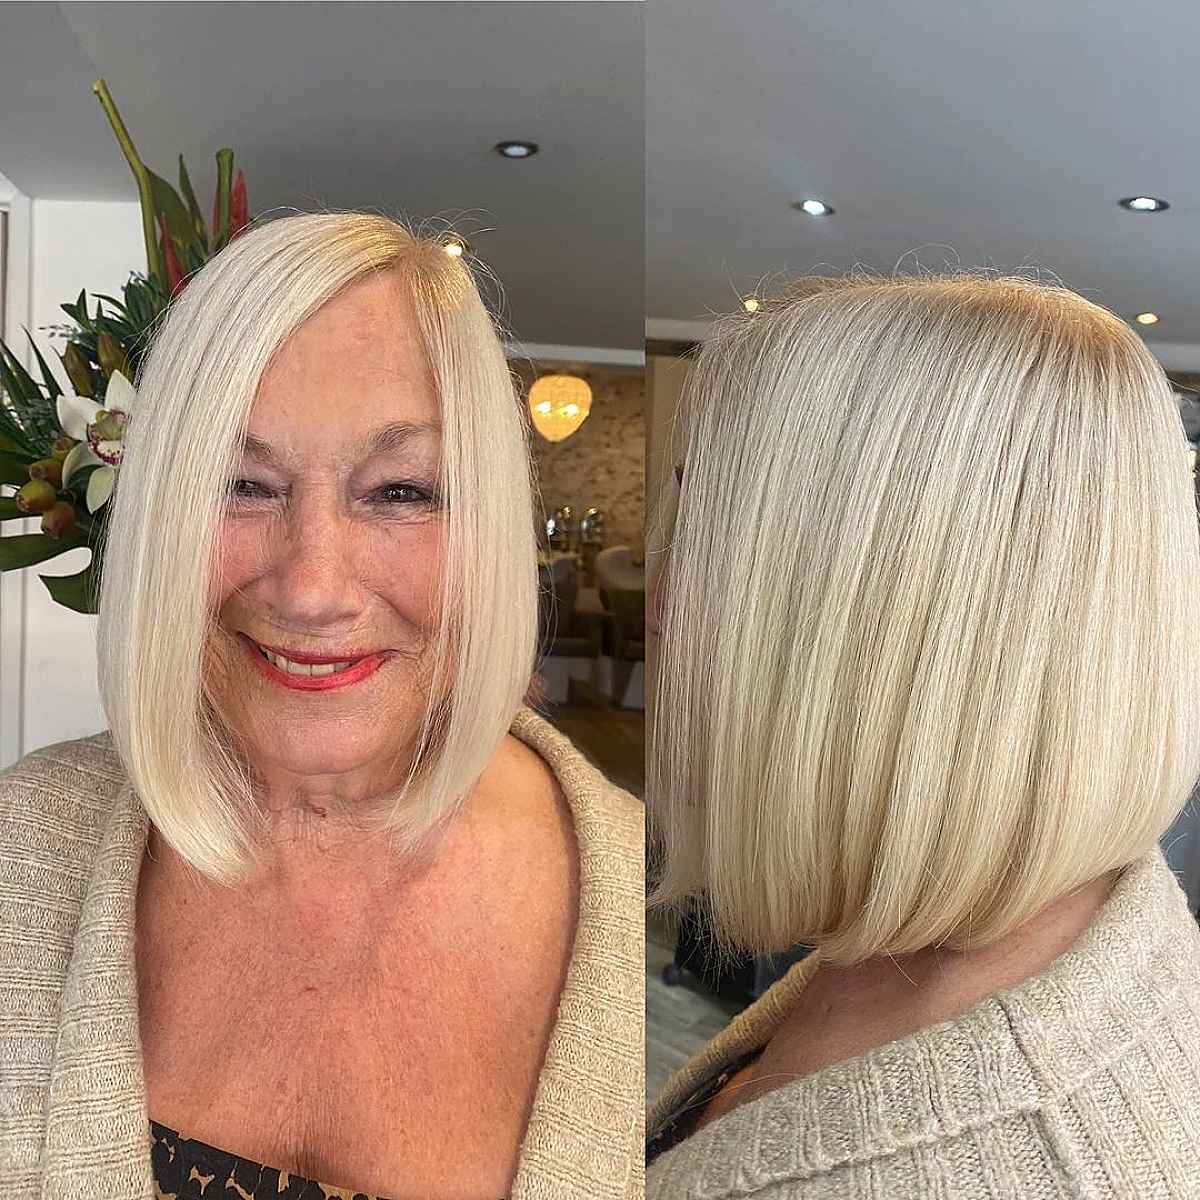 Classic Long Bob for Fine Hair for women in their 60s